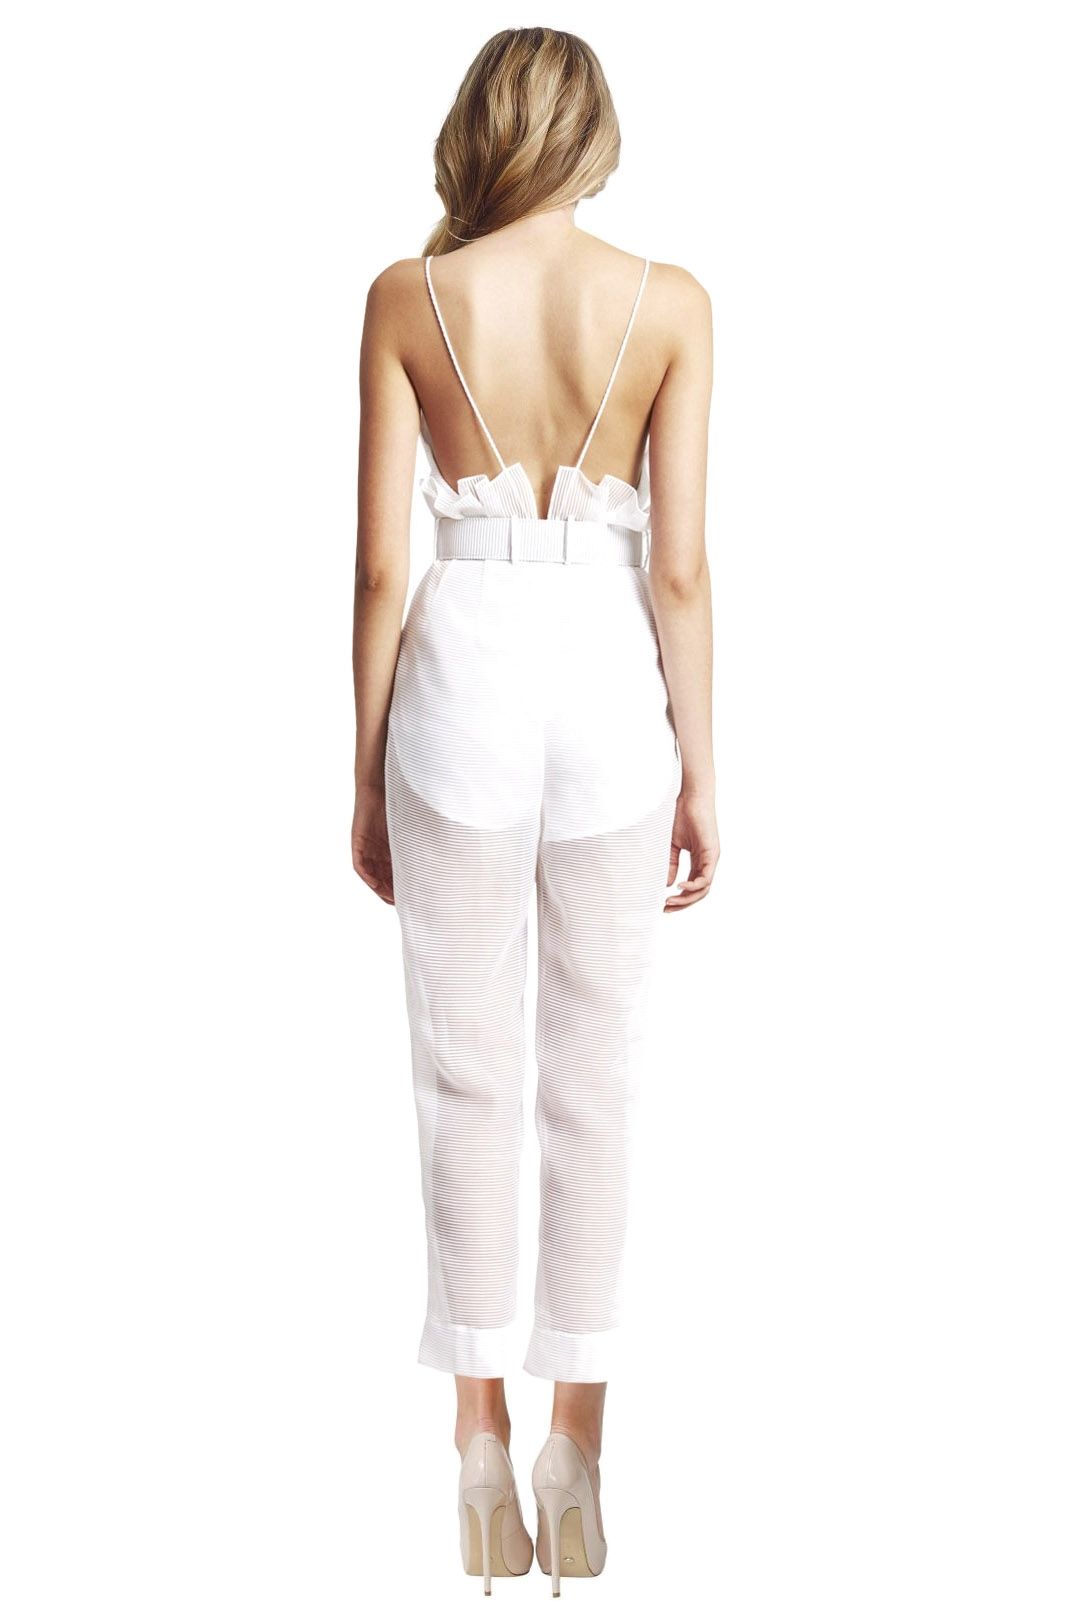 Alice McCall - Justify My Love Jumpsuit - White - Back